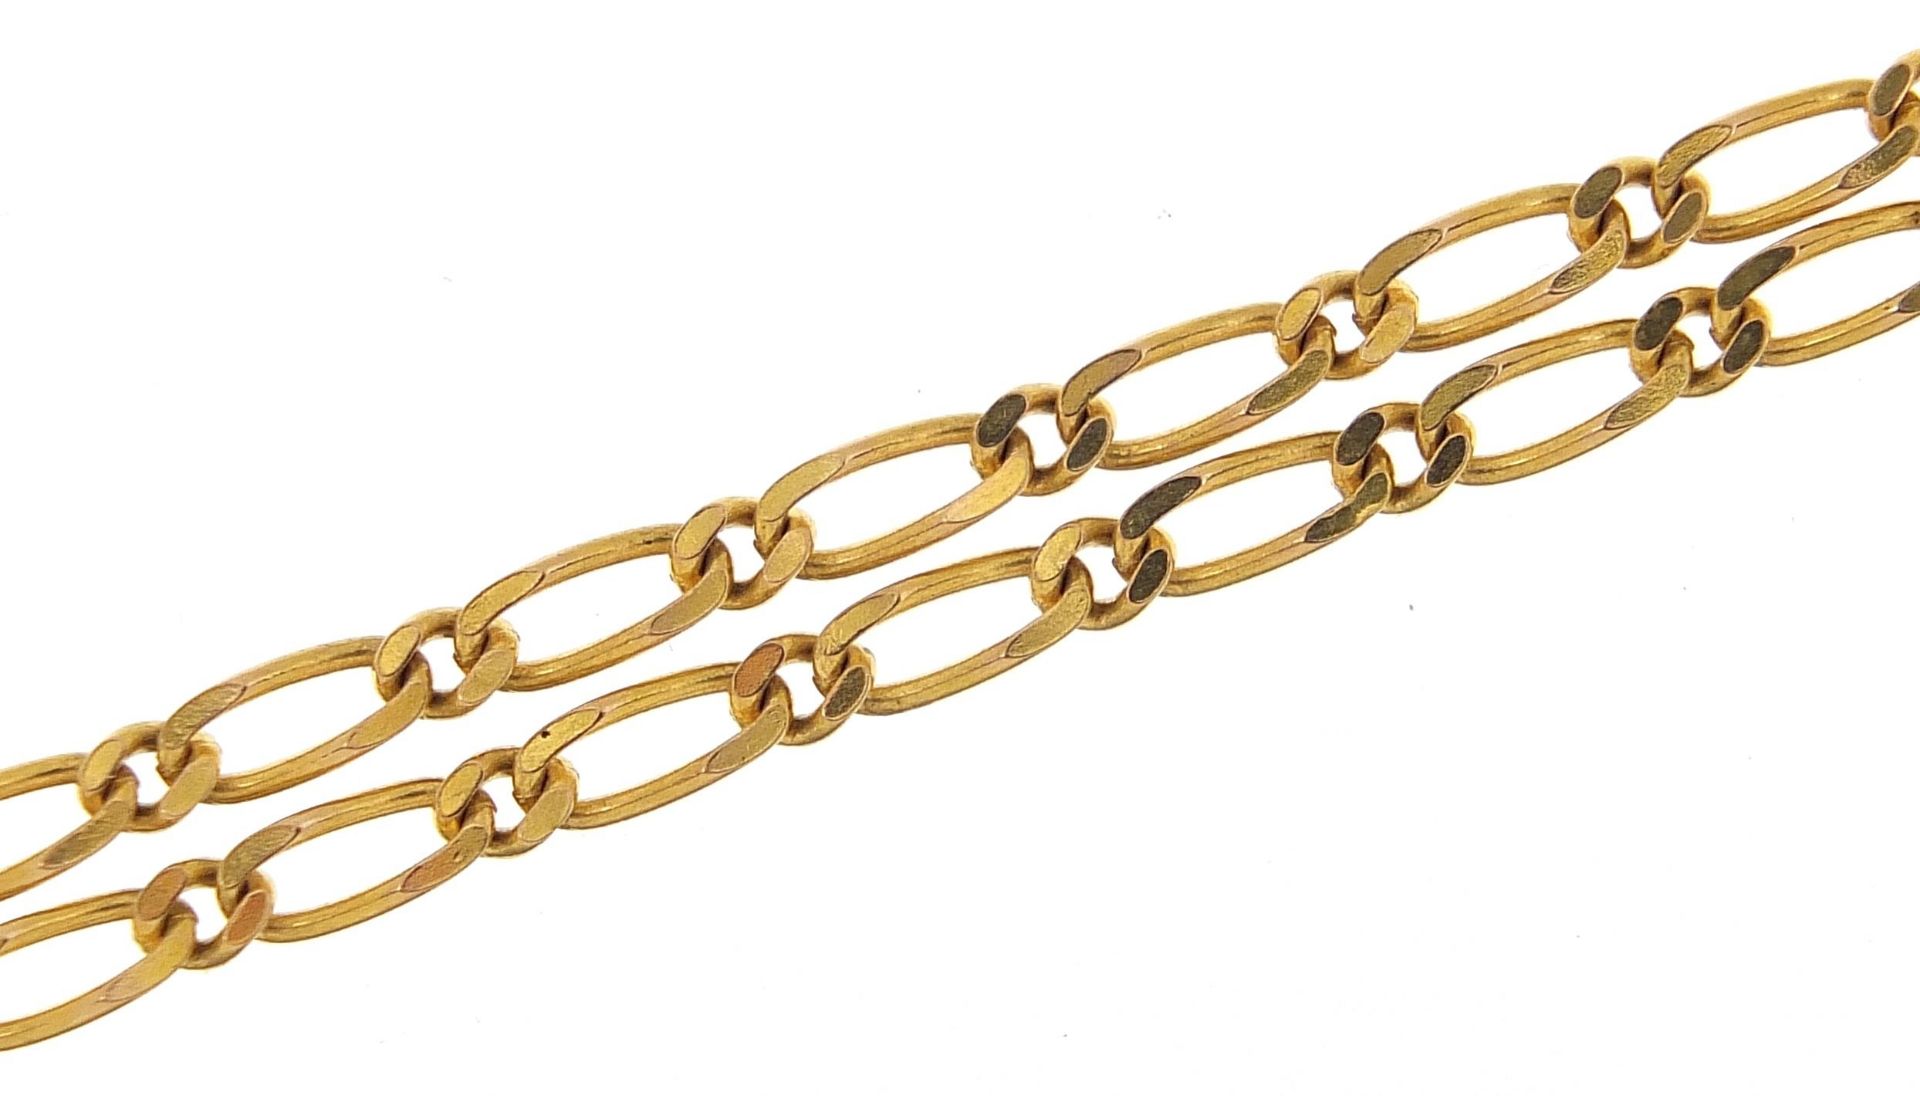 9ct gold figaro link necklace, 49.5cm in length, 6.0g - this lot is sold without buyer's premium